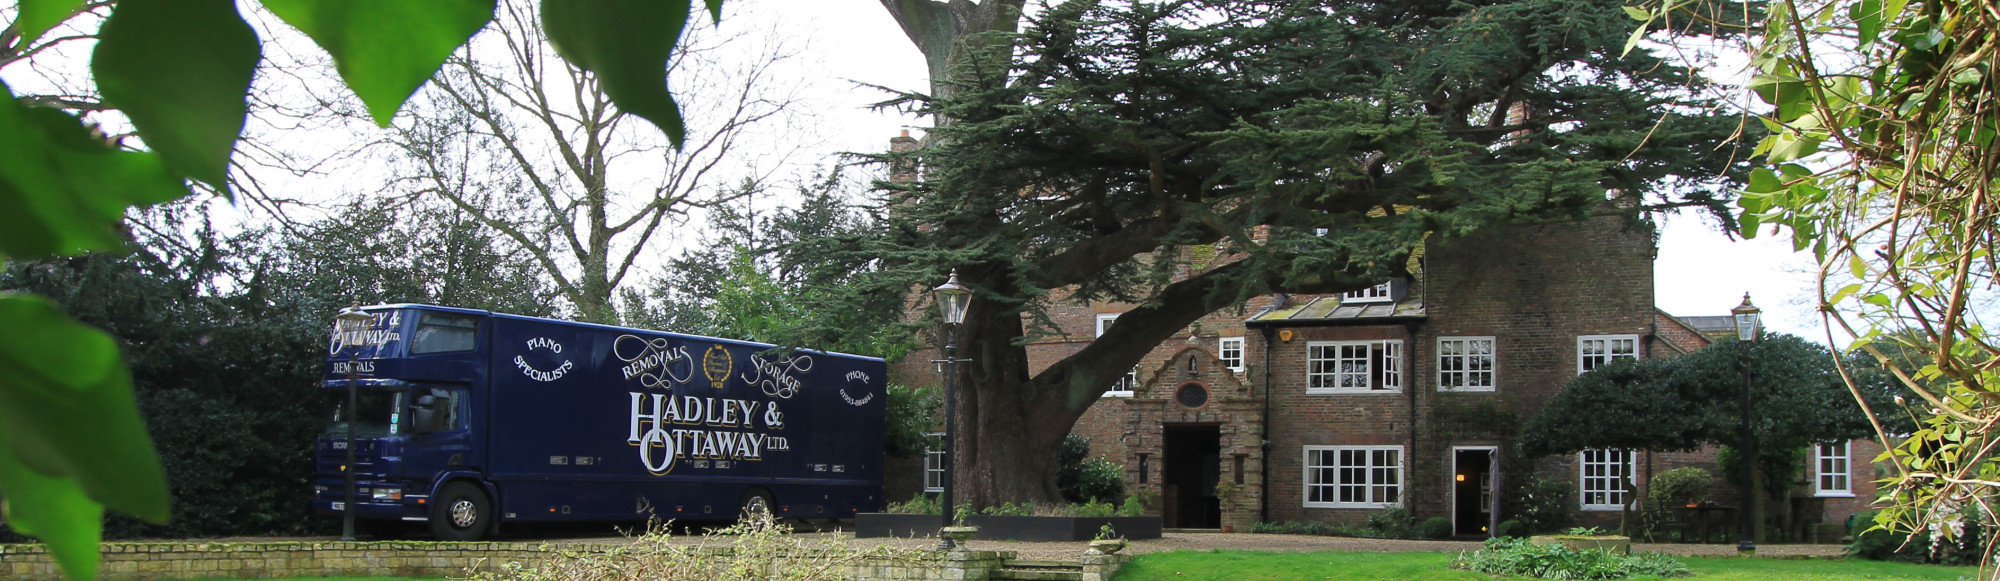 hadley and ottaway house removals